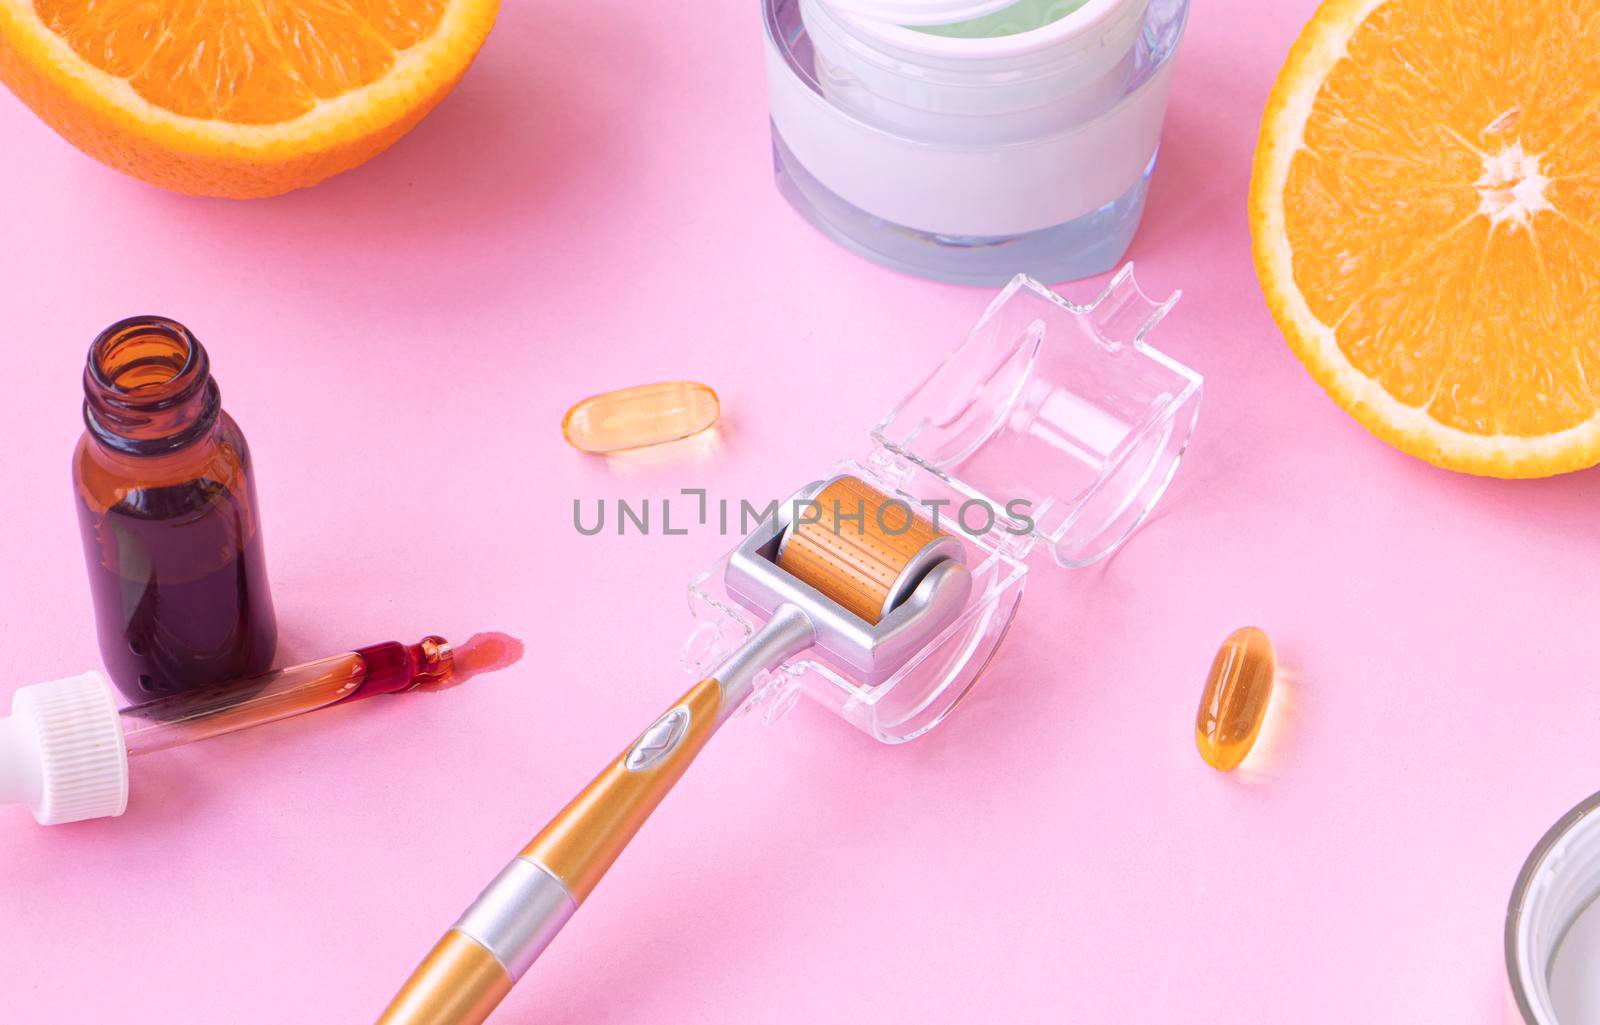 cosmetic instrument for microdermabrasion. background of open face serum spilled from a pipette. Face cream and citruses in the background. Vitamin C concept in skin care, cosmetics and cosmetology.